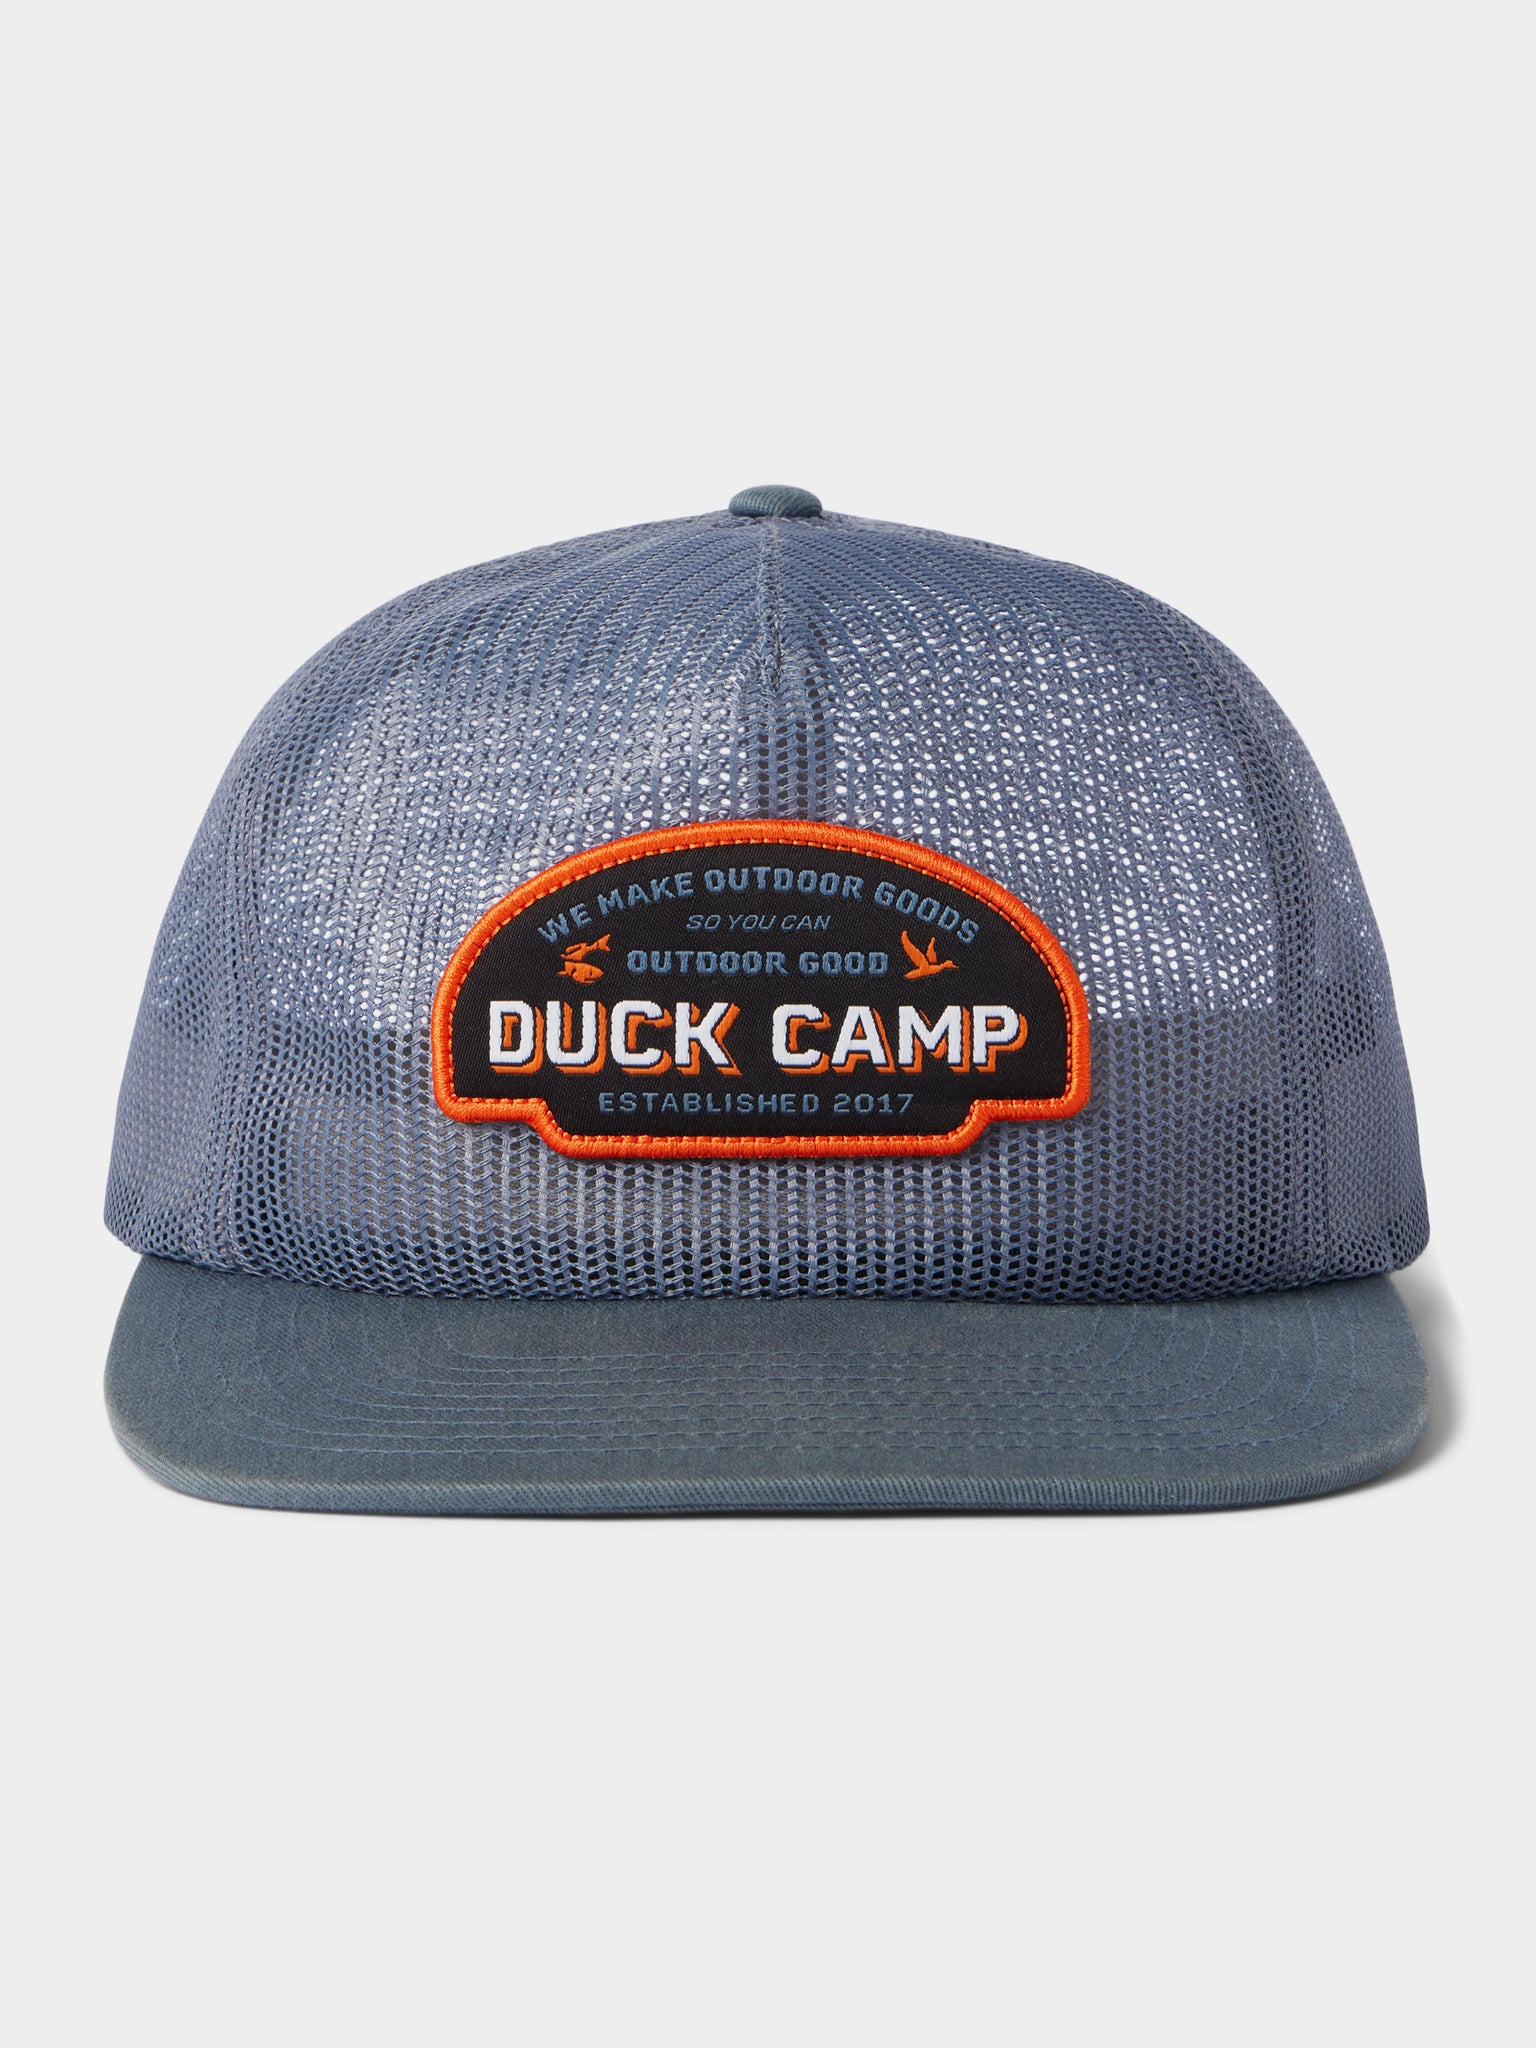 Hunting and Fishing Hats – Page 2 – Duck Camp